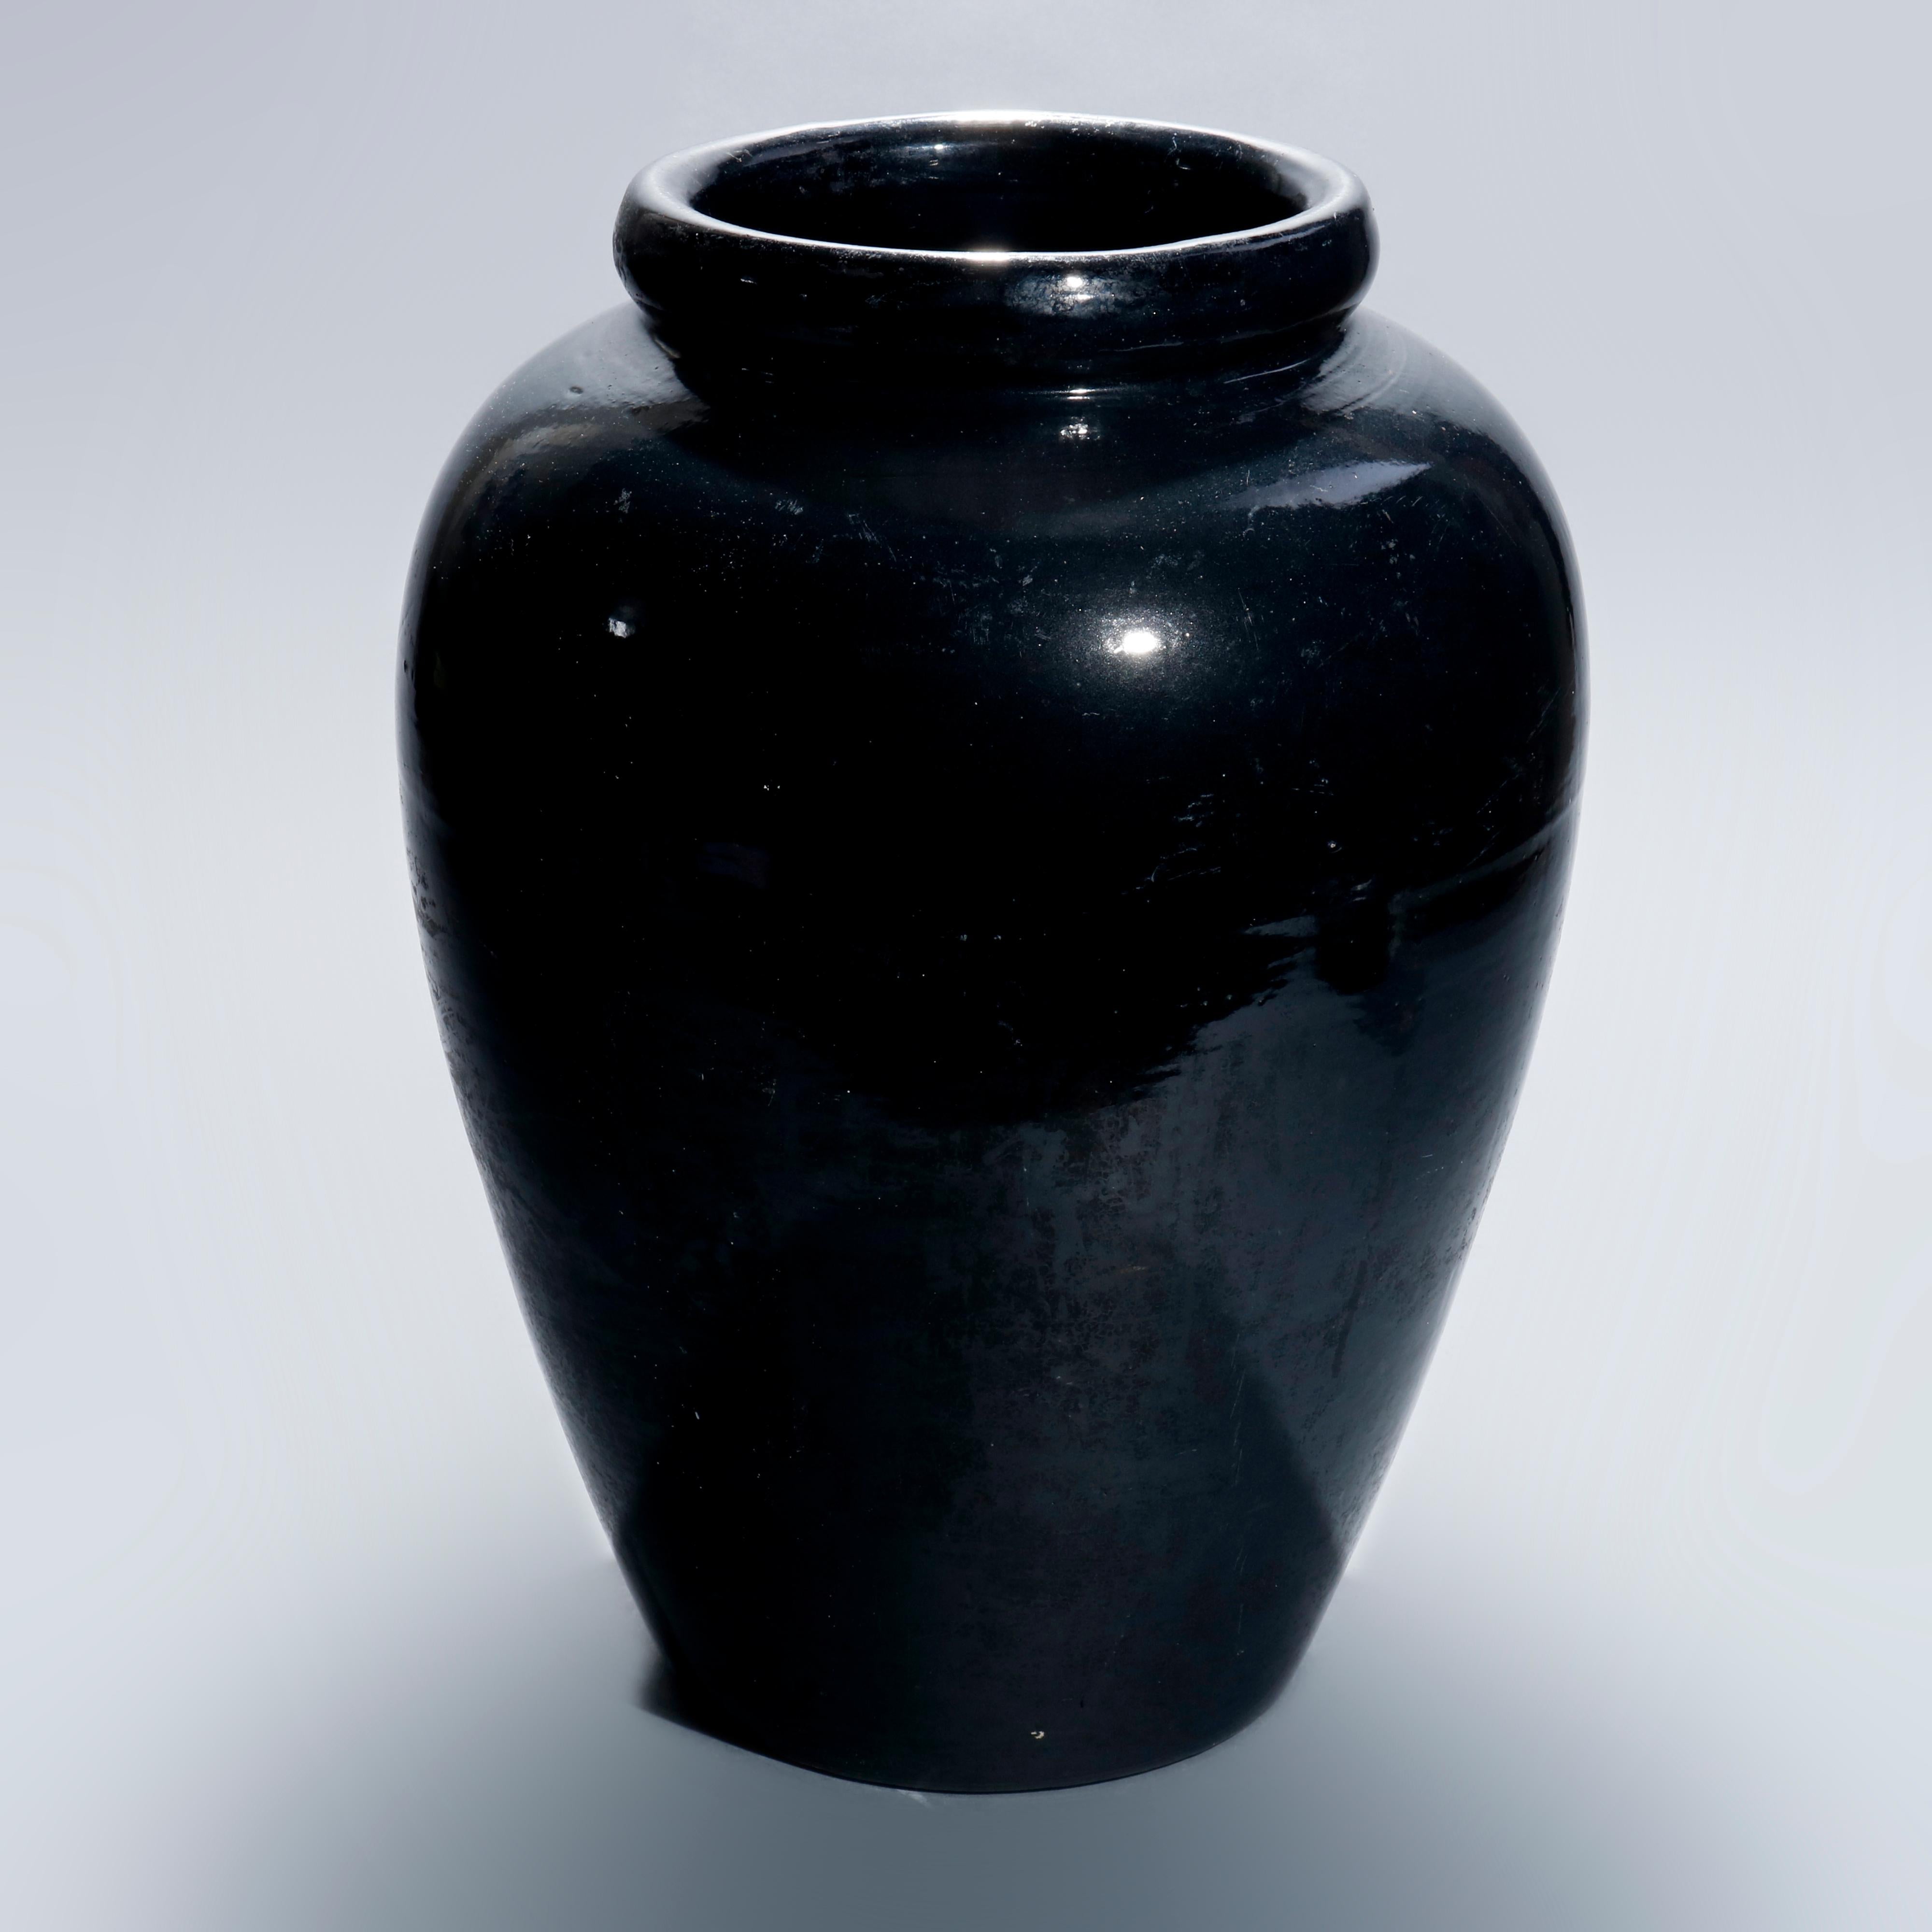 An Arts & Crafts art pottery floor vase in the manner of McCoy offers glazed exterior and hand numbered on base as photographed, 20th century

Measures: 18